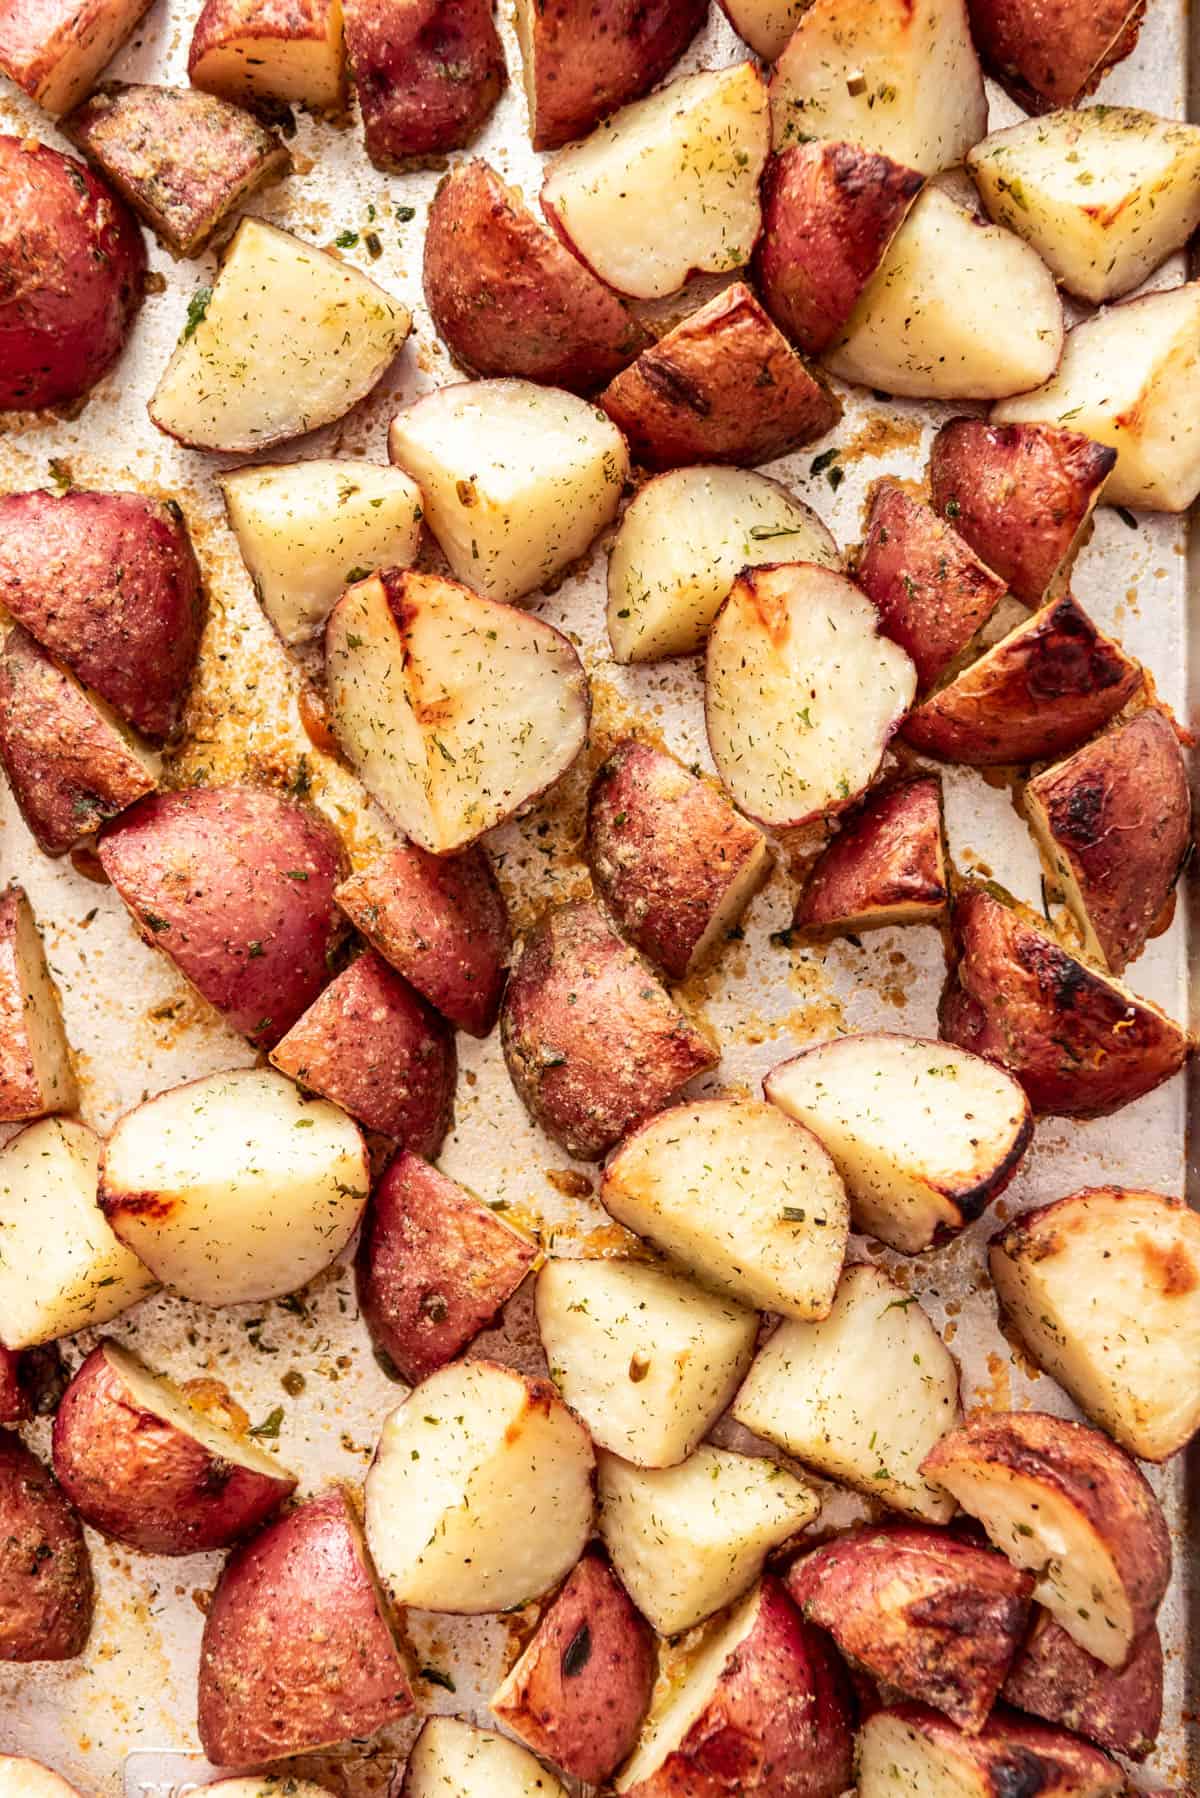 A close image of roasted ranch potatoes on a baking sheet.